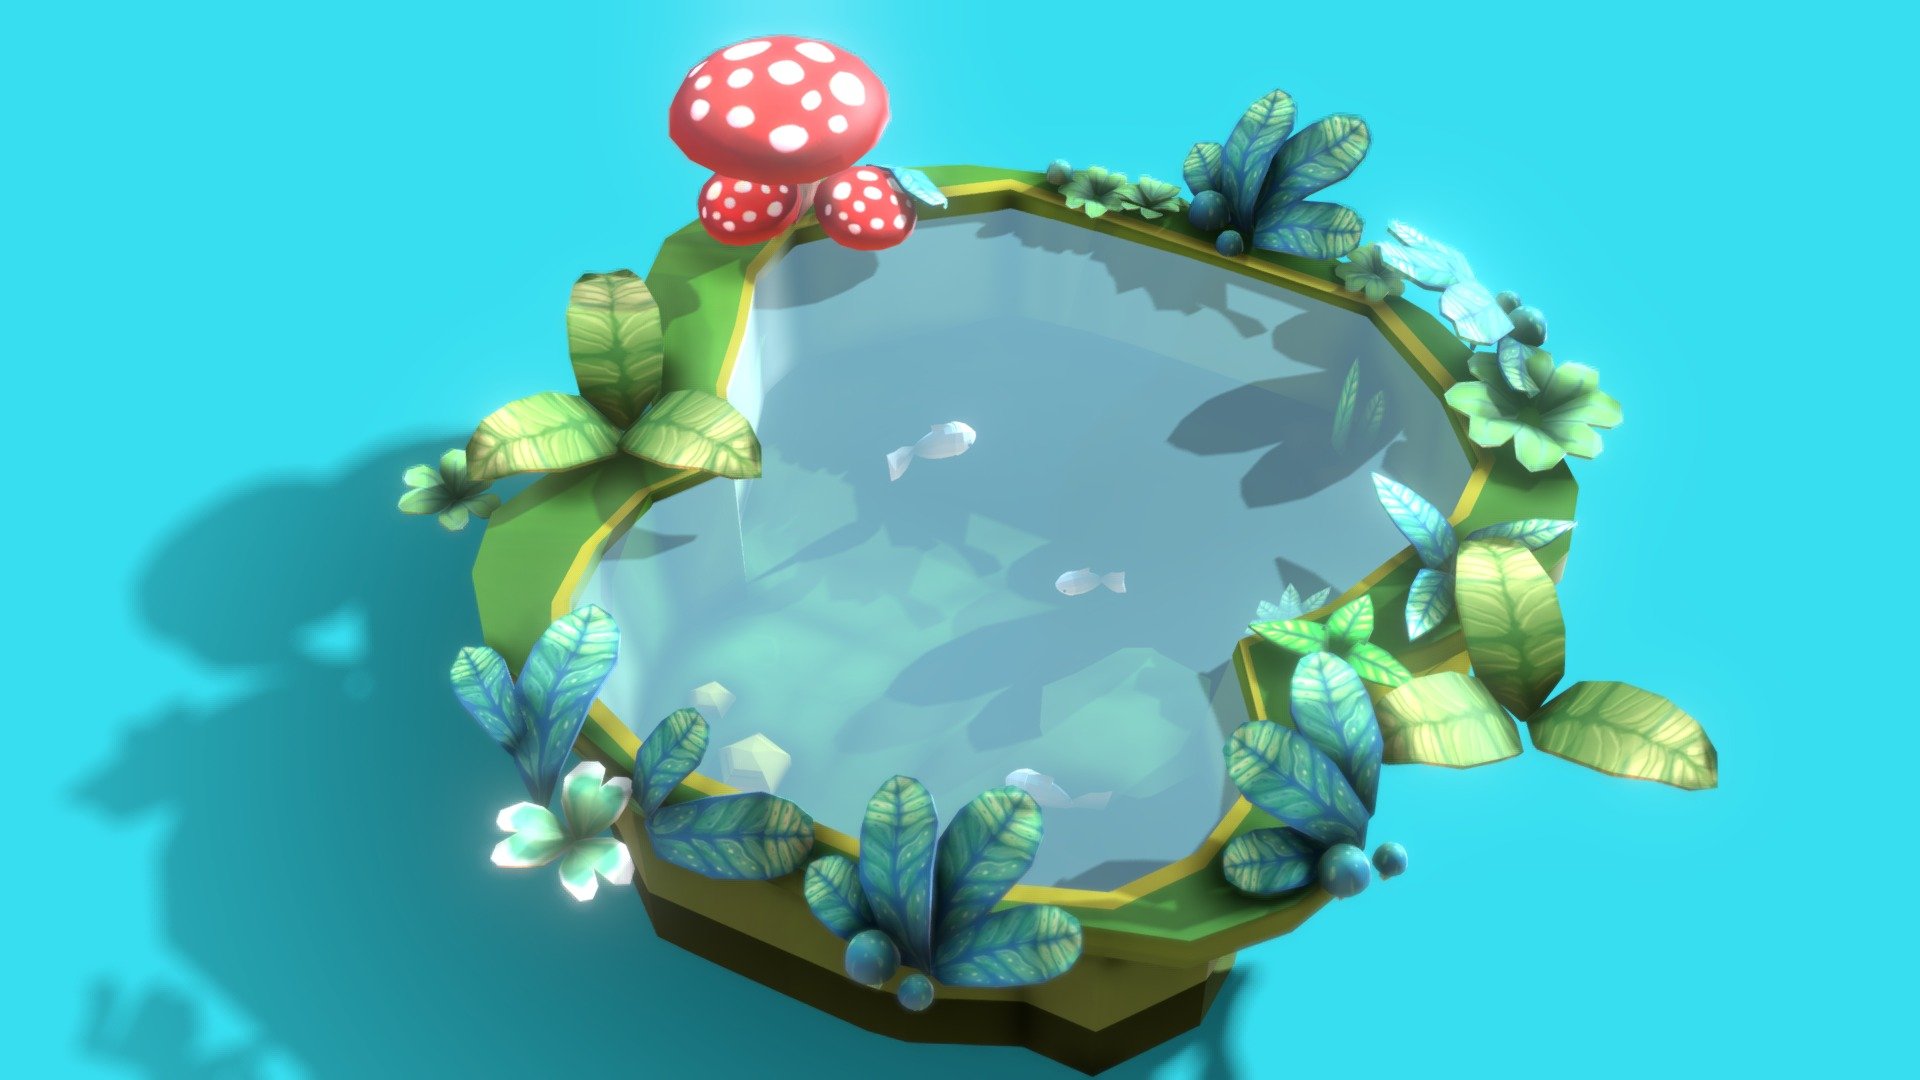 Just a recent project with animated fish and bubble in a little pond 3d model